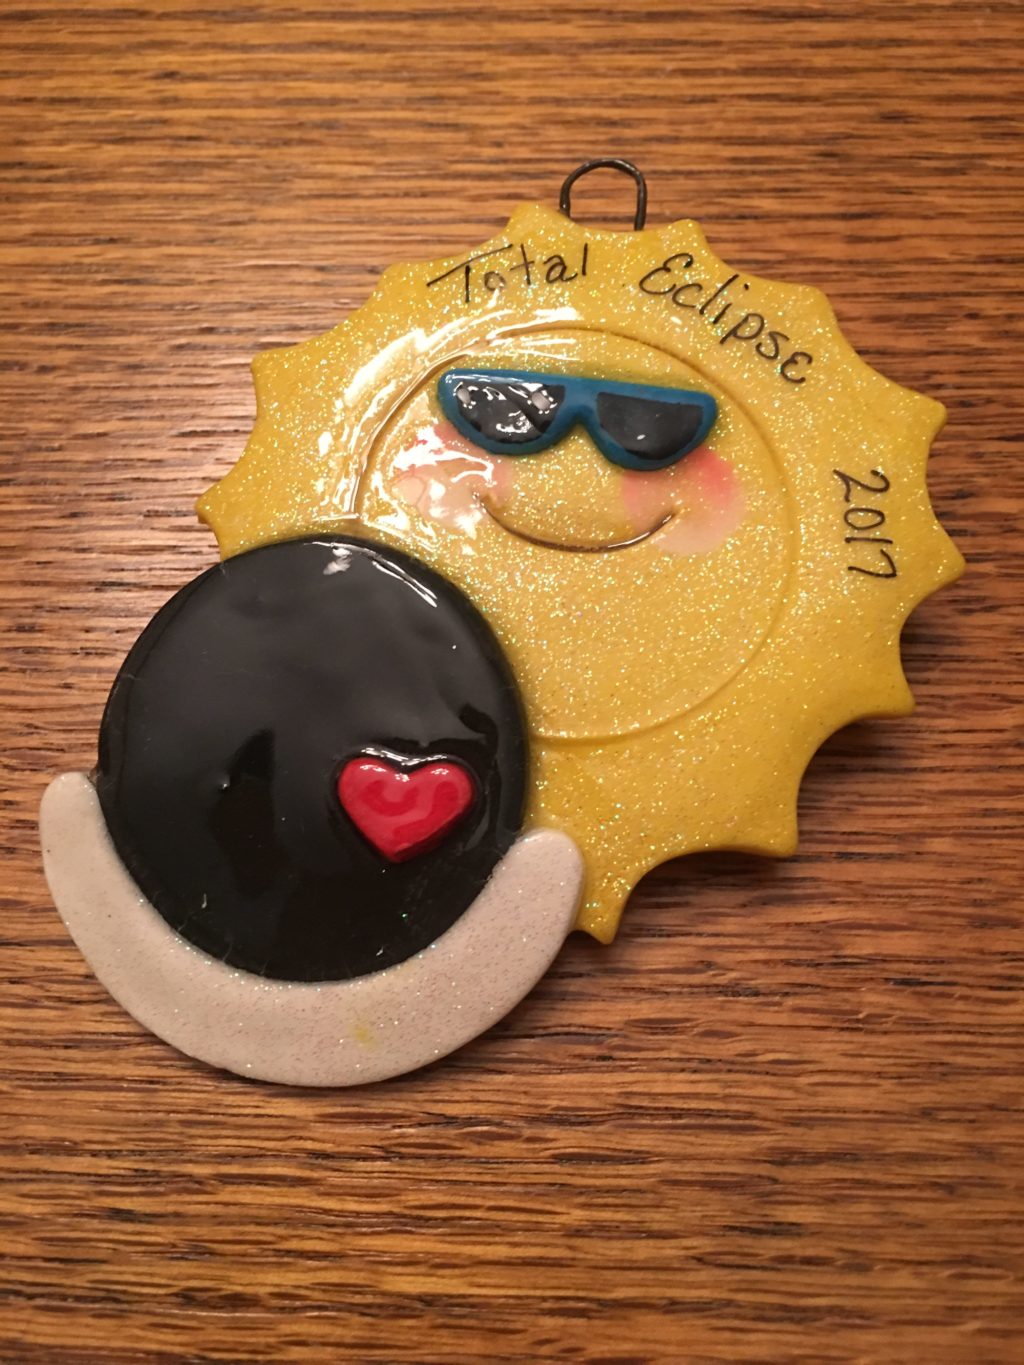 A sun and moon ornament on top of a table.